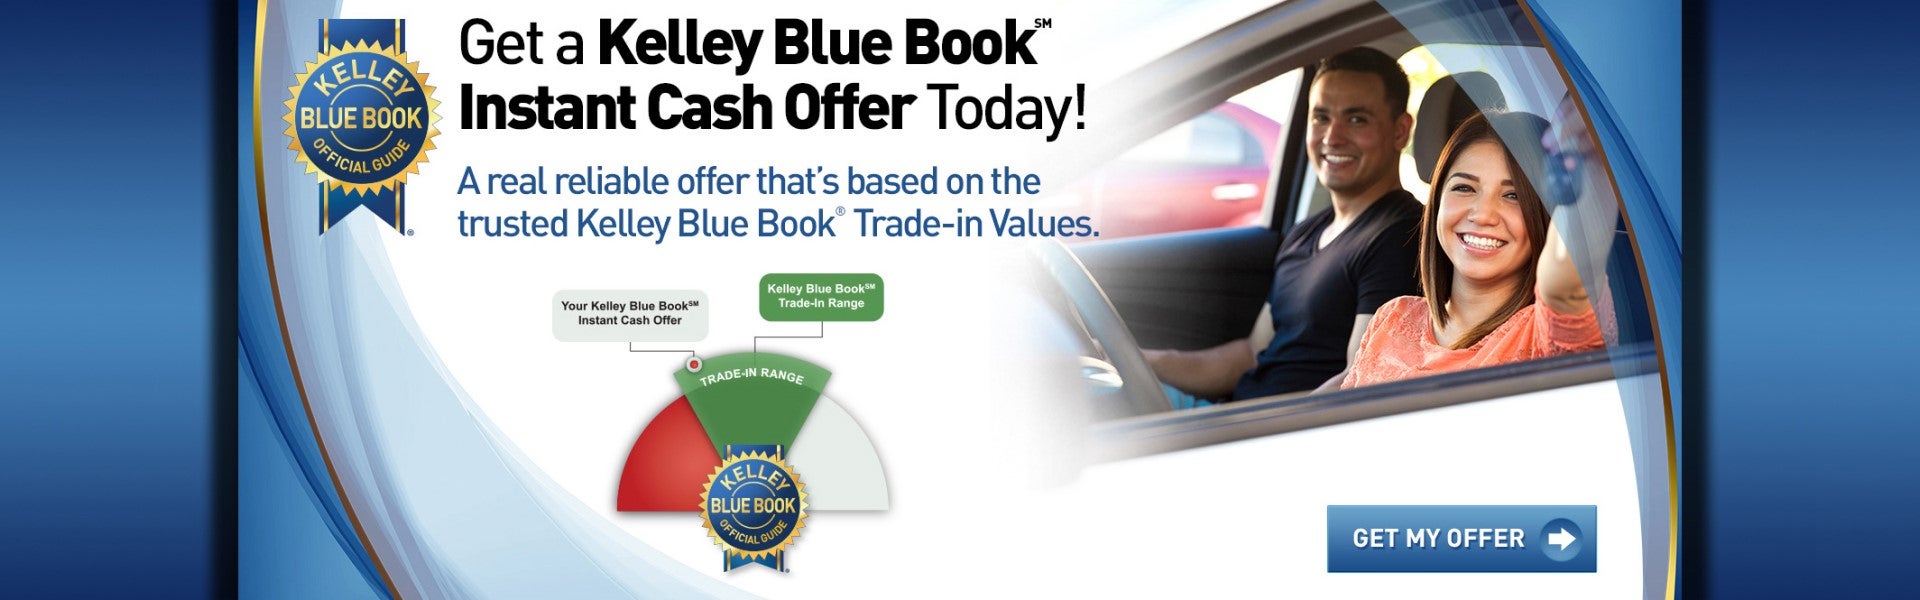 Get A Kelly Blue Book Instant Cash Offer Today!